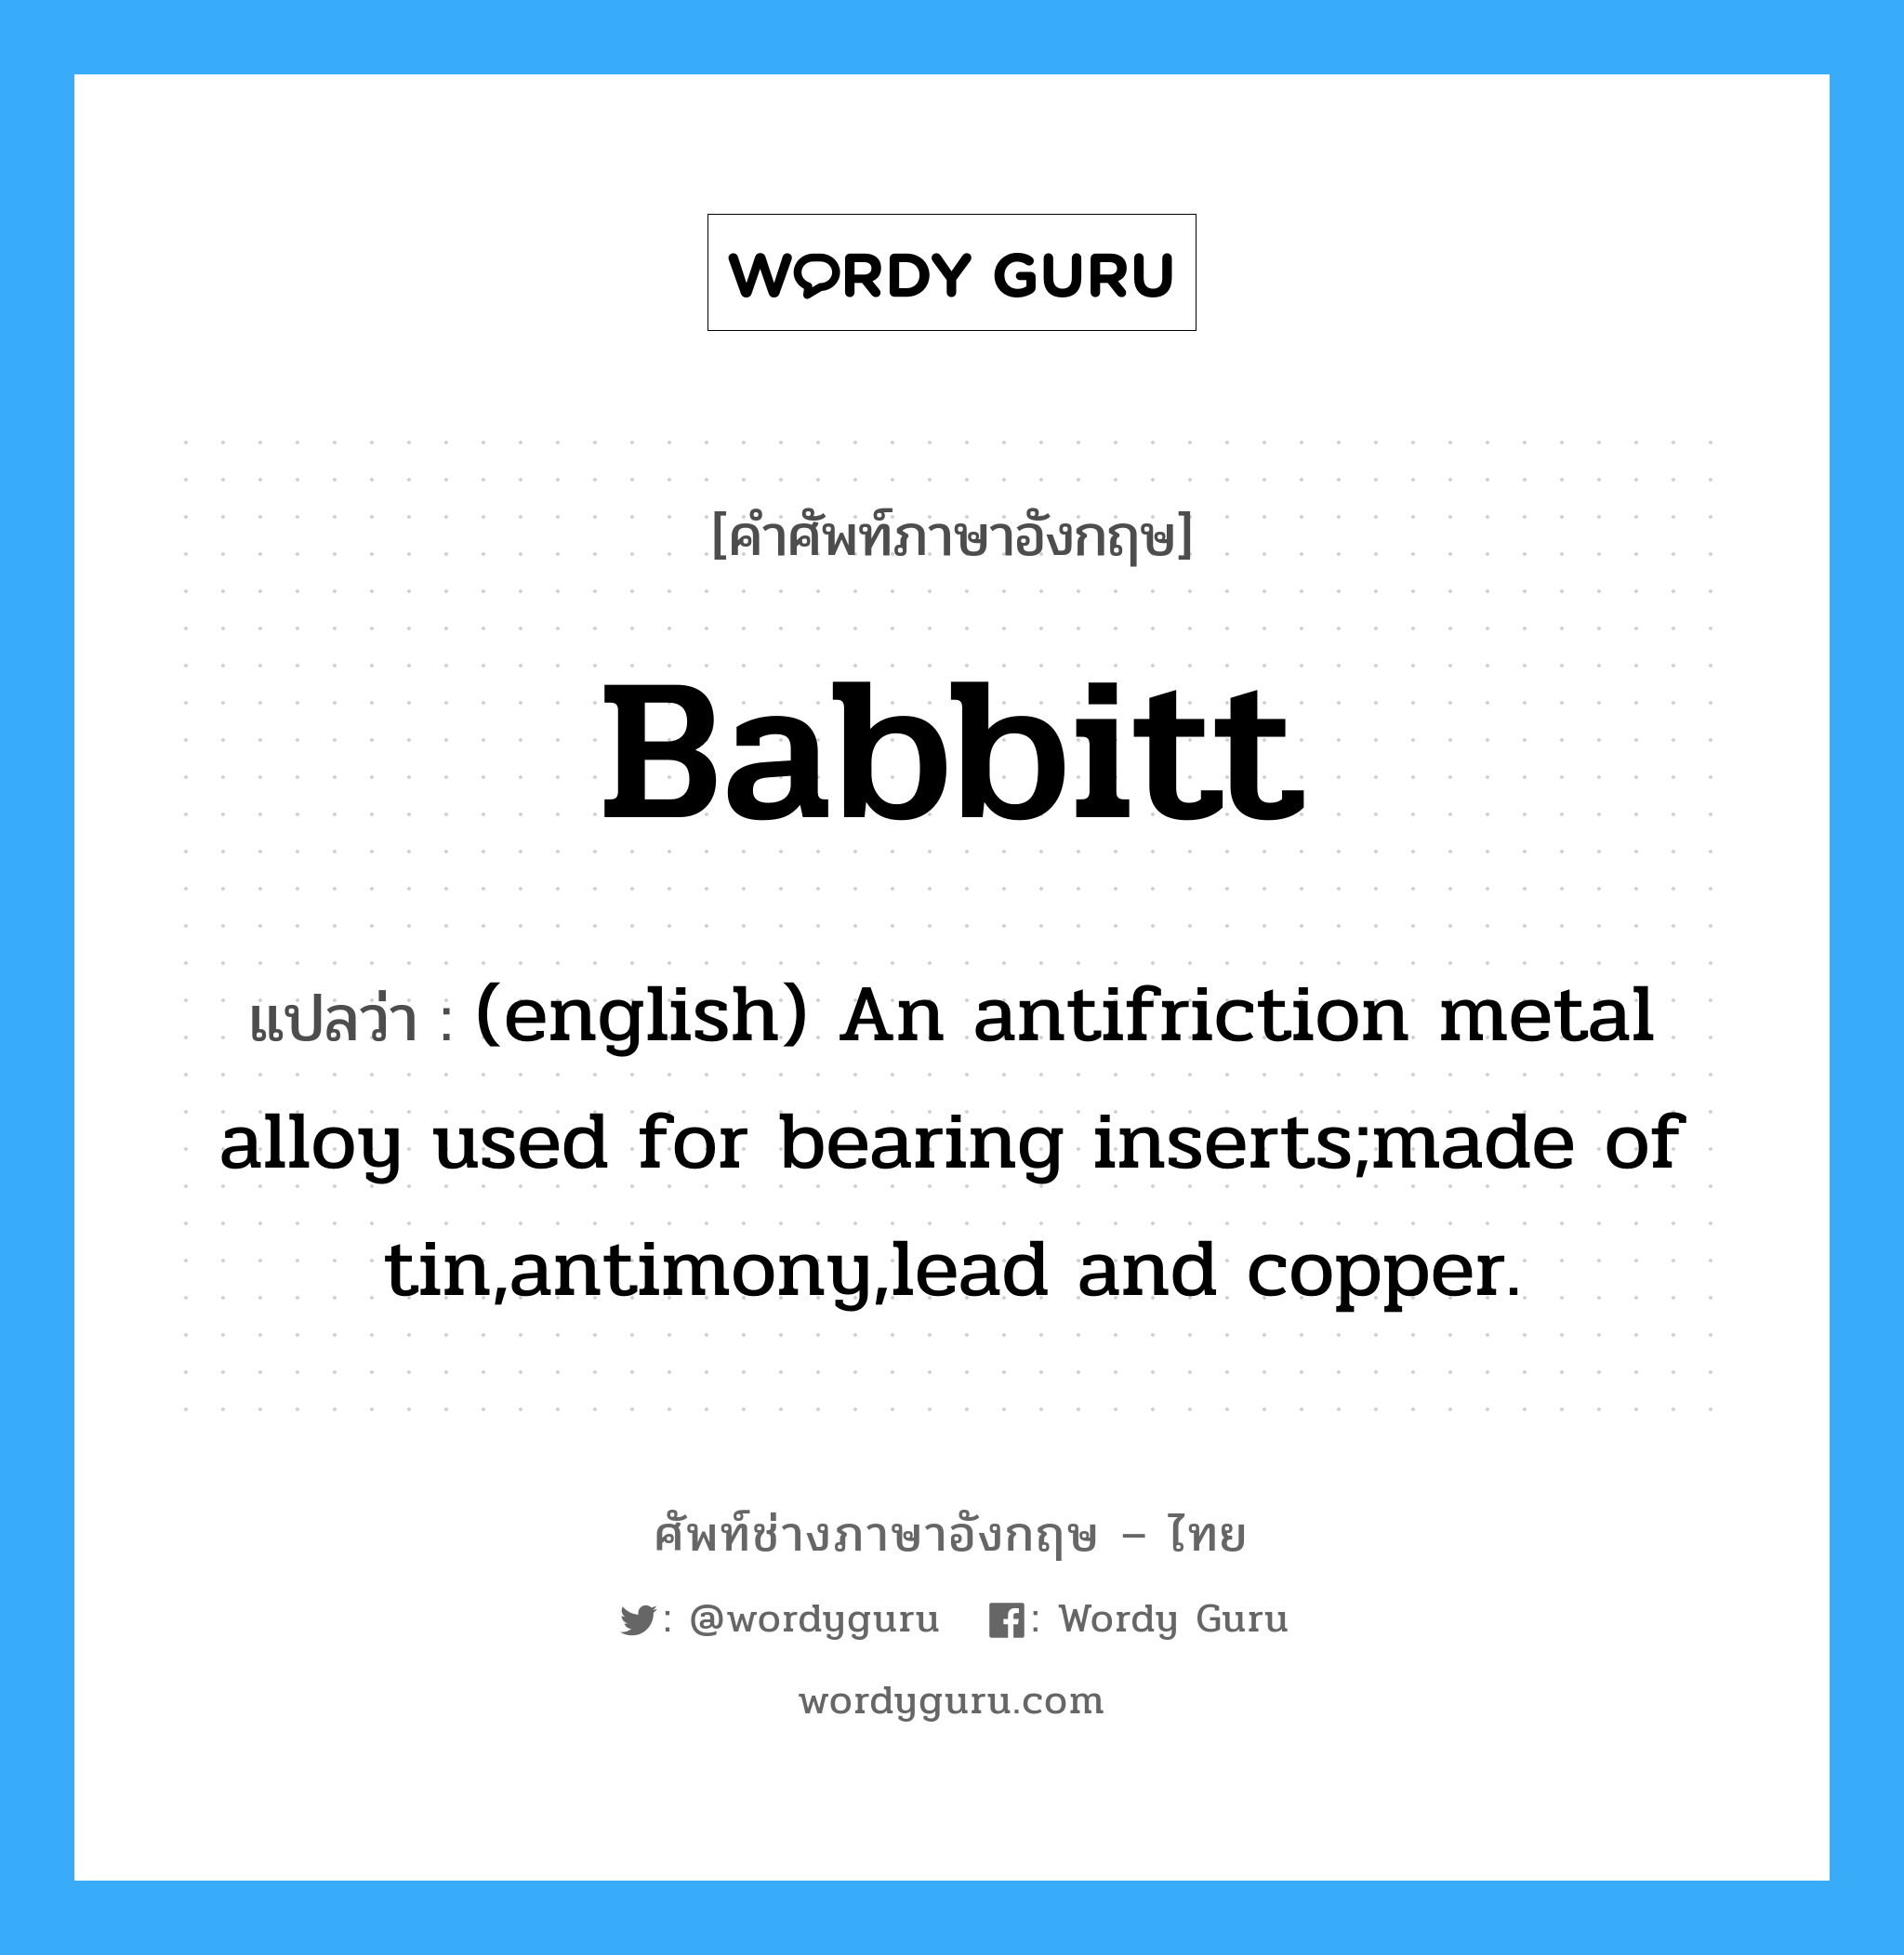 Babbitt แปลว่า?, คำศัพท์ช่างภาษาอังกฤษ - ไทย Babbitt คำศัพท์ภาษาอังกฤษ Babbitt แปลว่า (english) An antifriction metal alloy used for bearing inserts;made of tin,antimony,lead and copper.